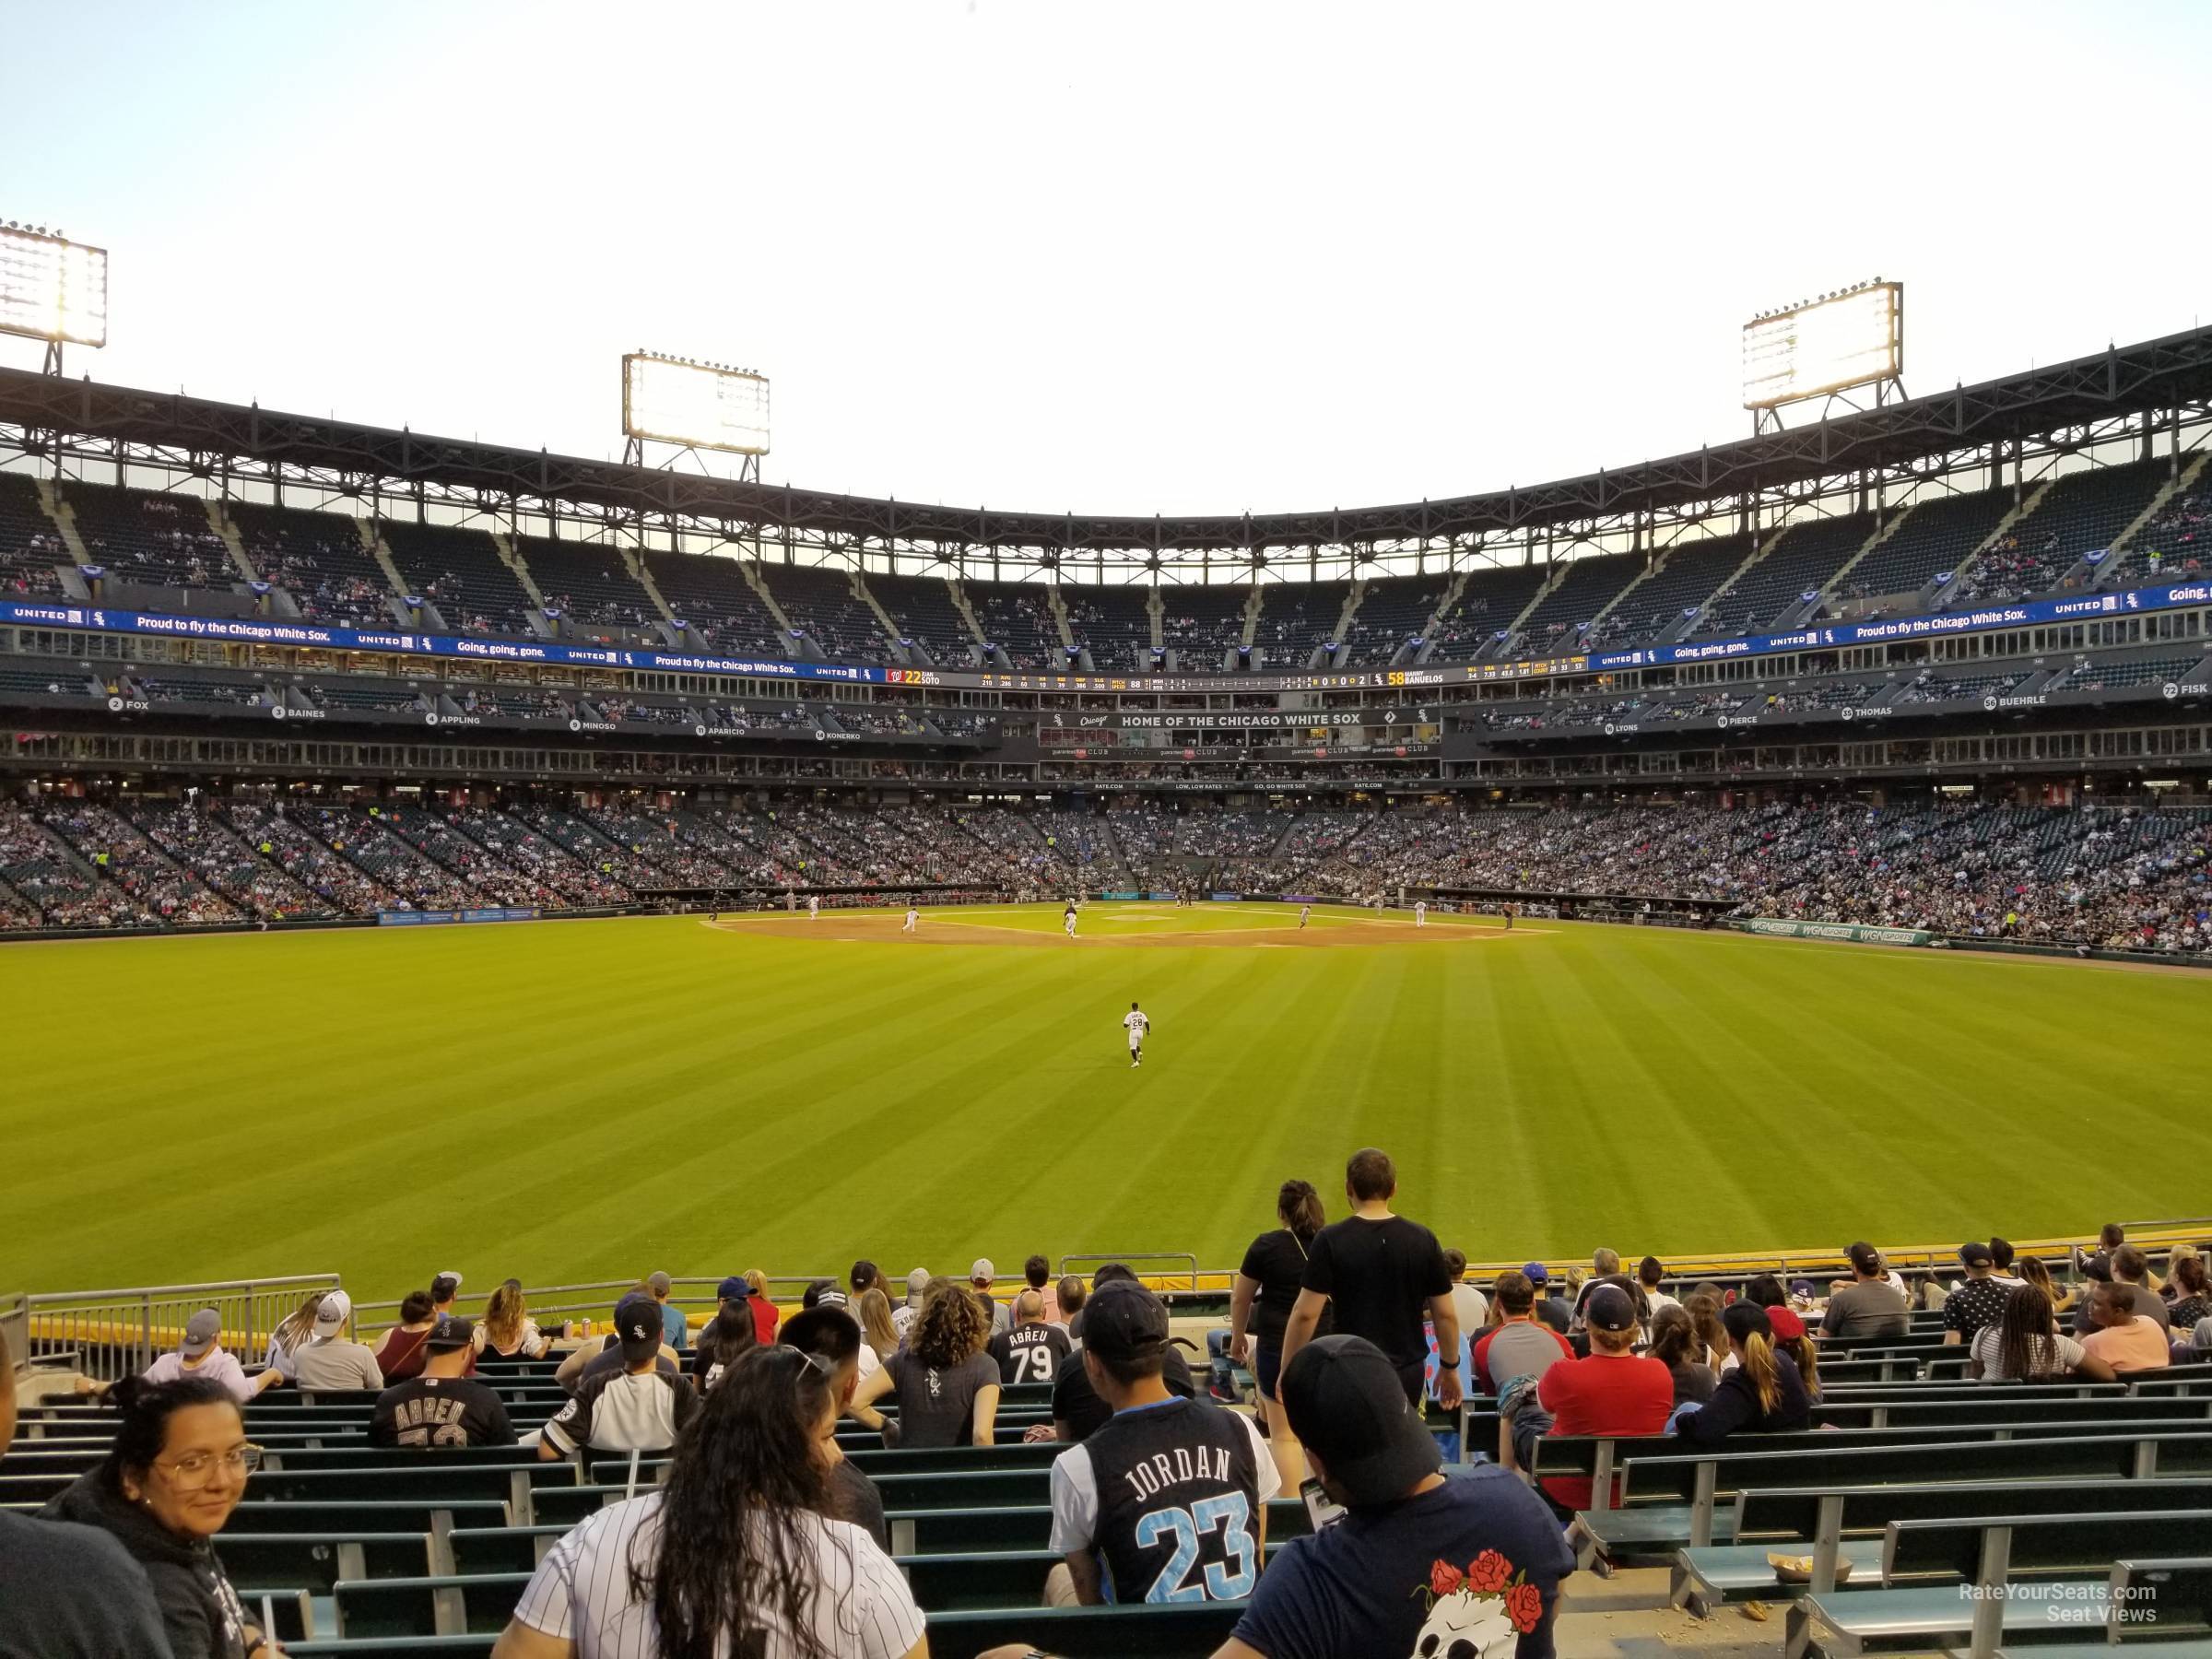 section 164, row 18 seat view  - guaranteed rate field